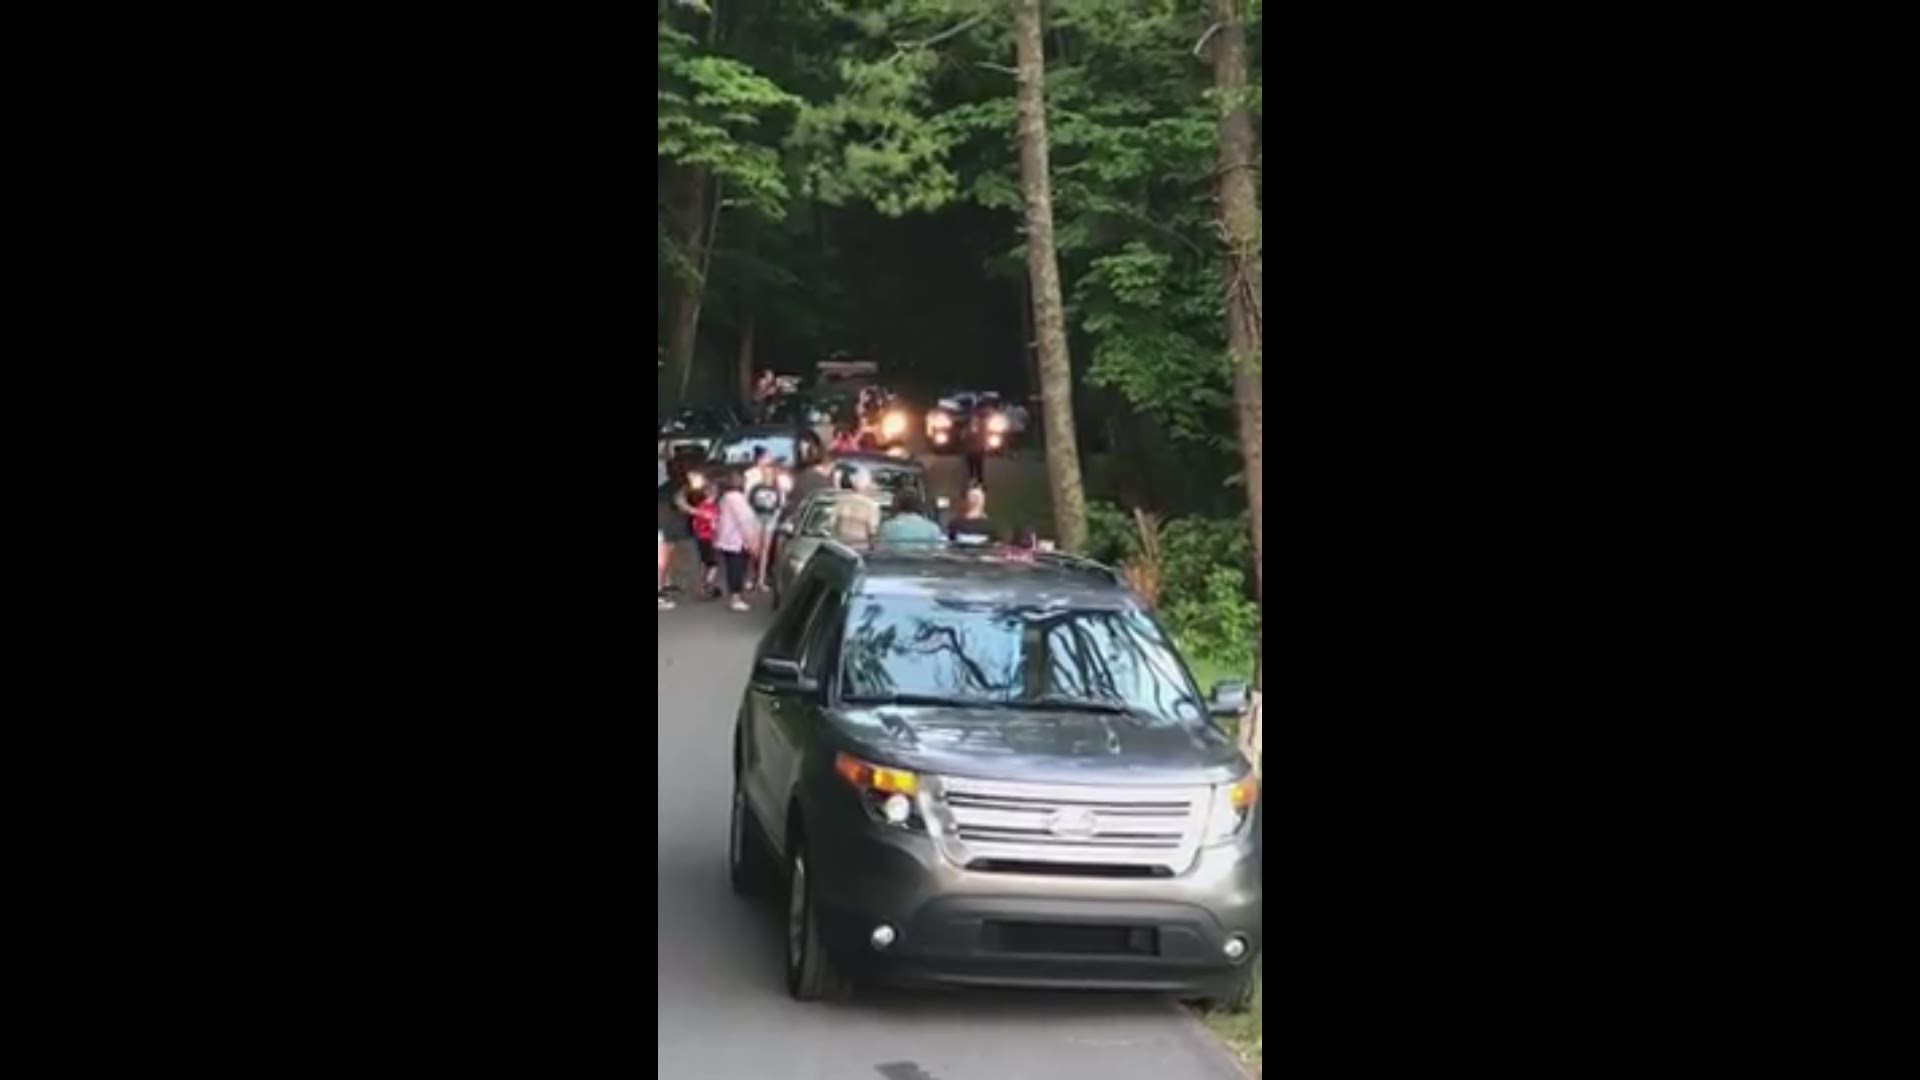 Park regulations require you to stay 50 yards away from bears at all times, according Great Smoky Mountains National Park Spokesperson Dana Soehn.